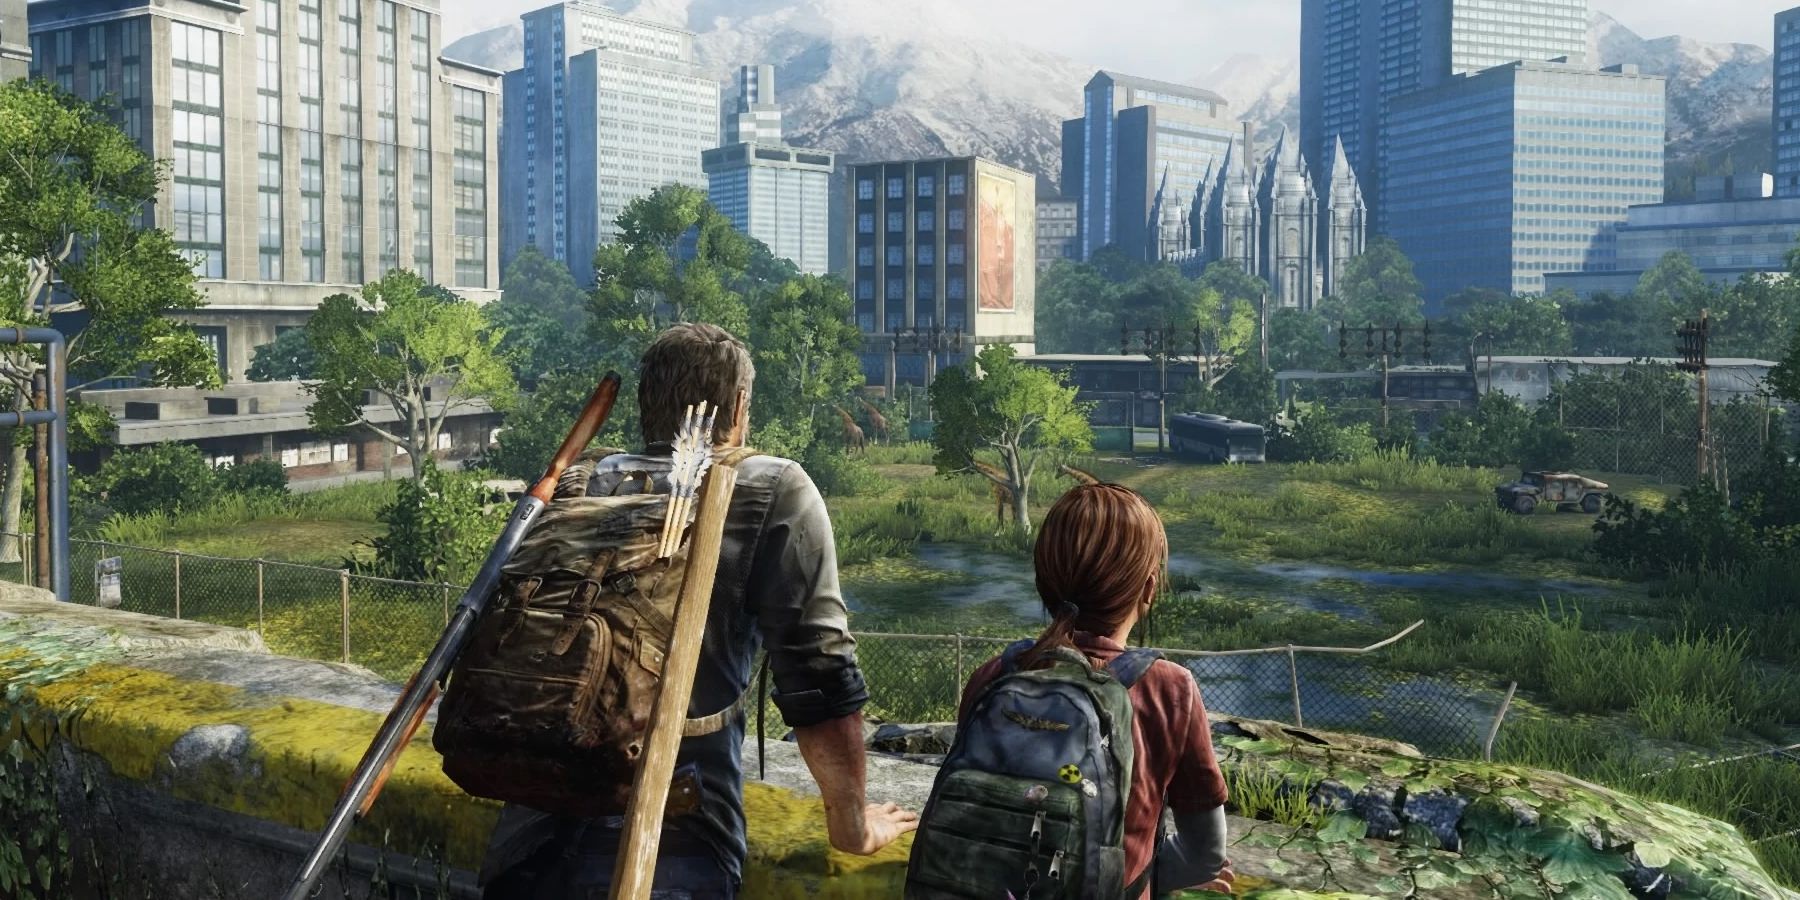 A Last of Us Prequel Starring Joel and Tommy Wouldn't Be A Bad Idea